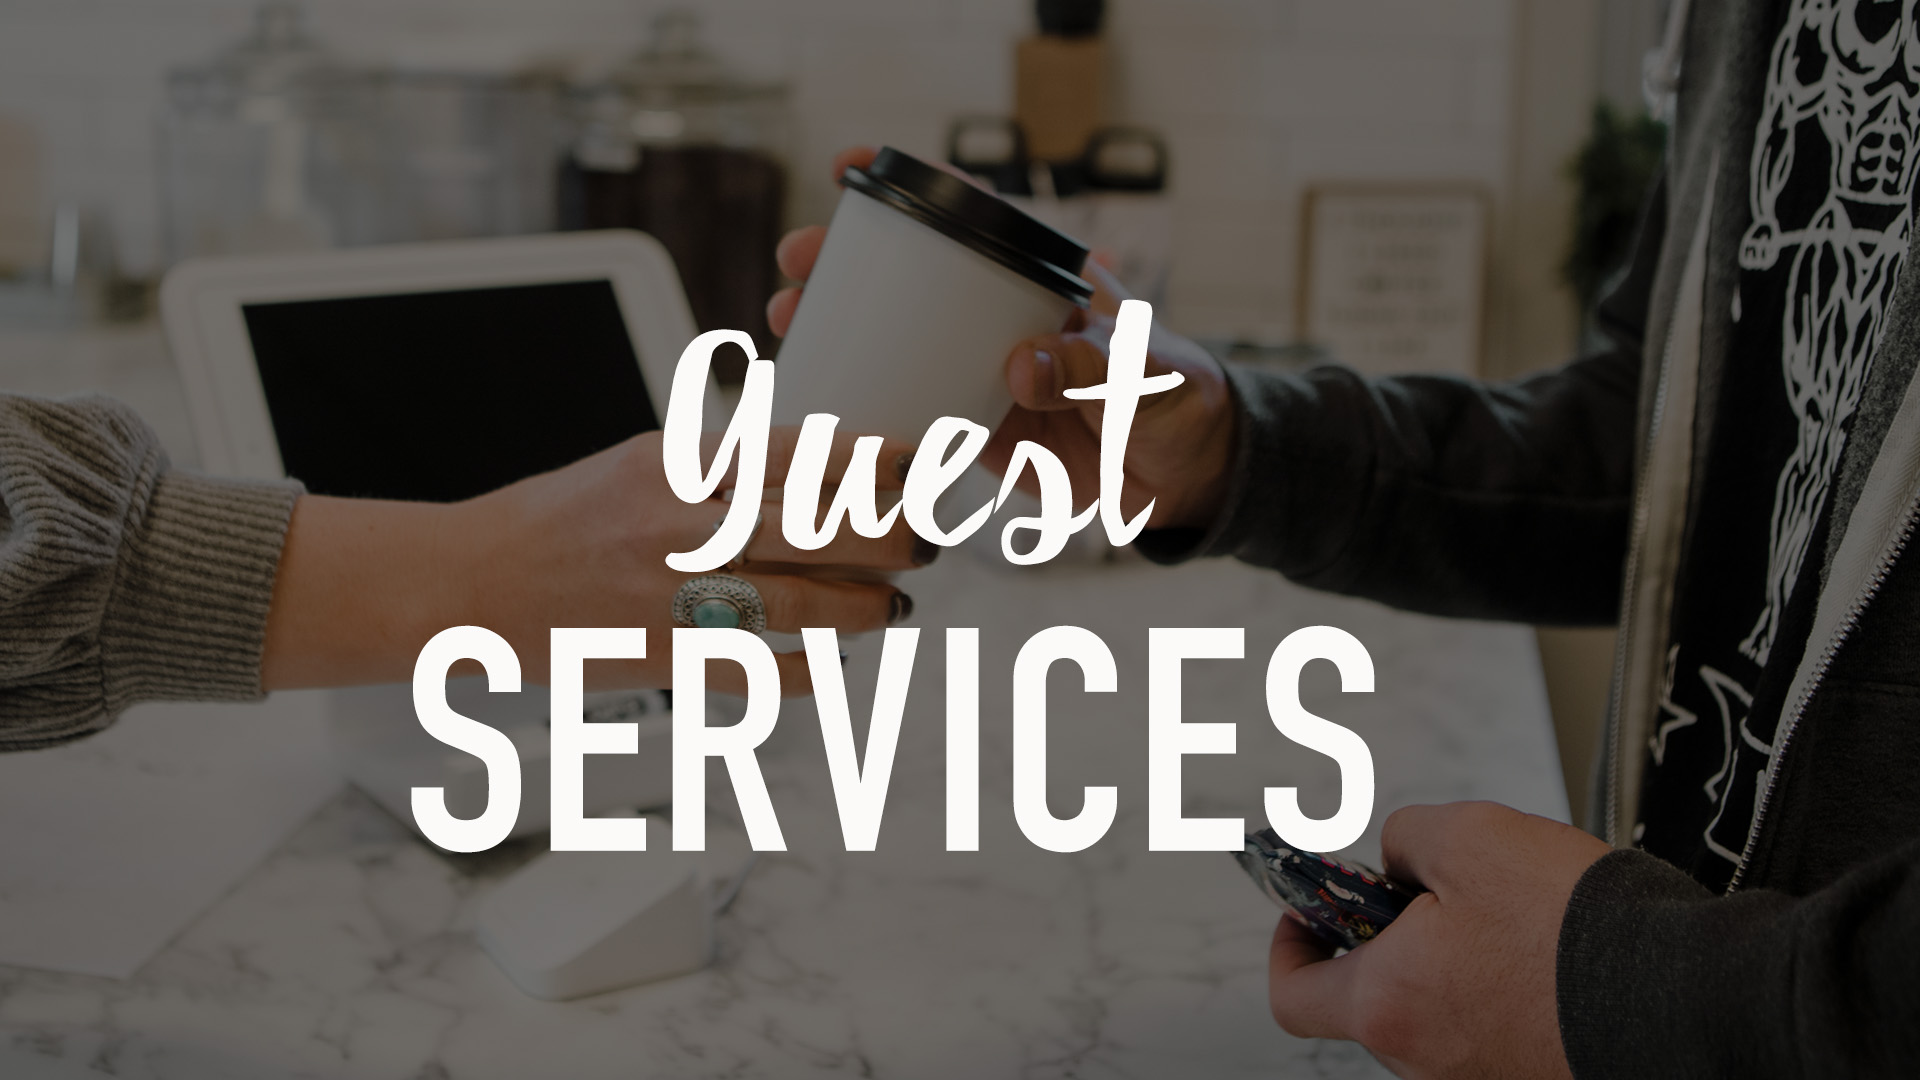 Volunteer with any Guest Services Team

 
